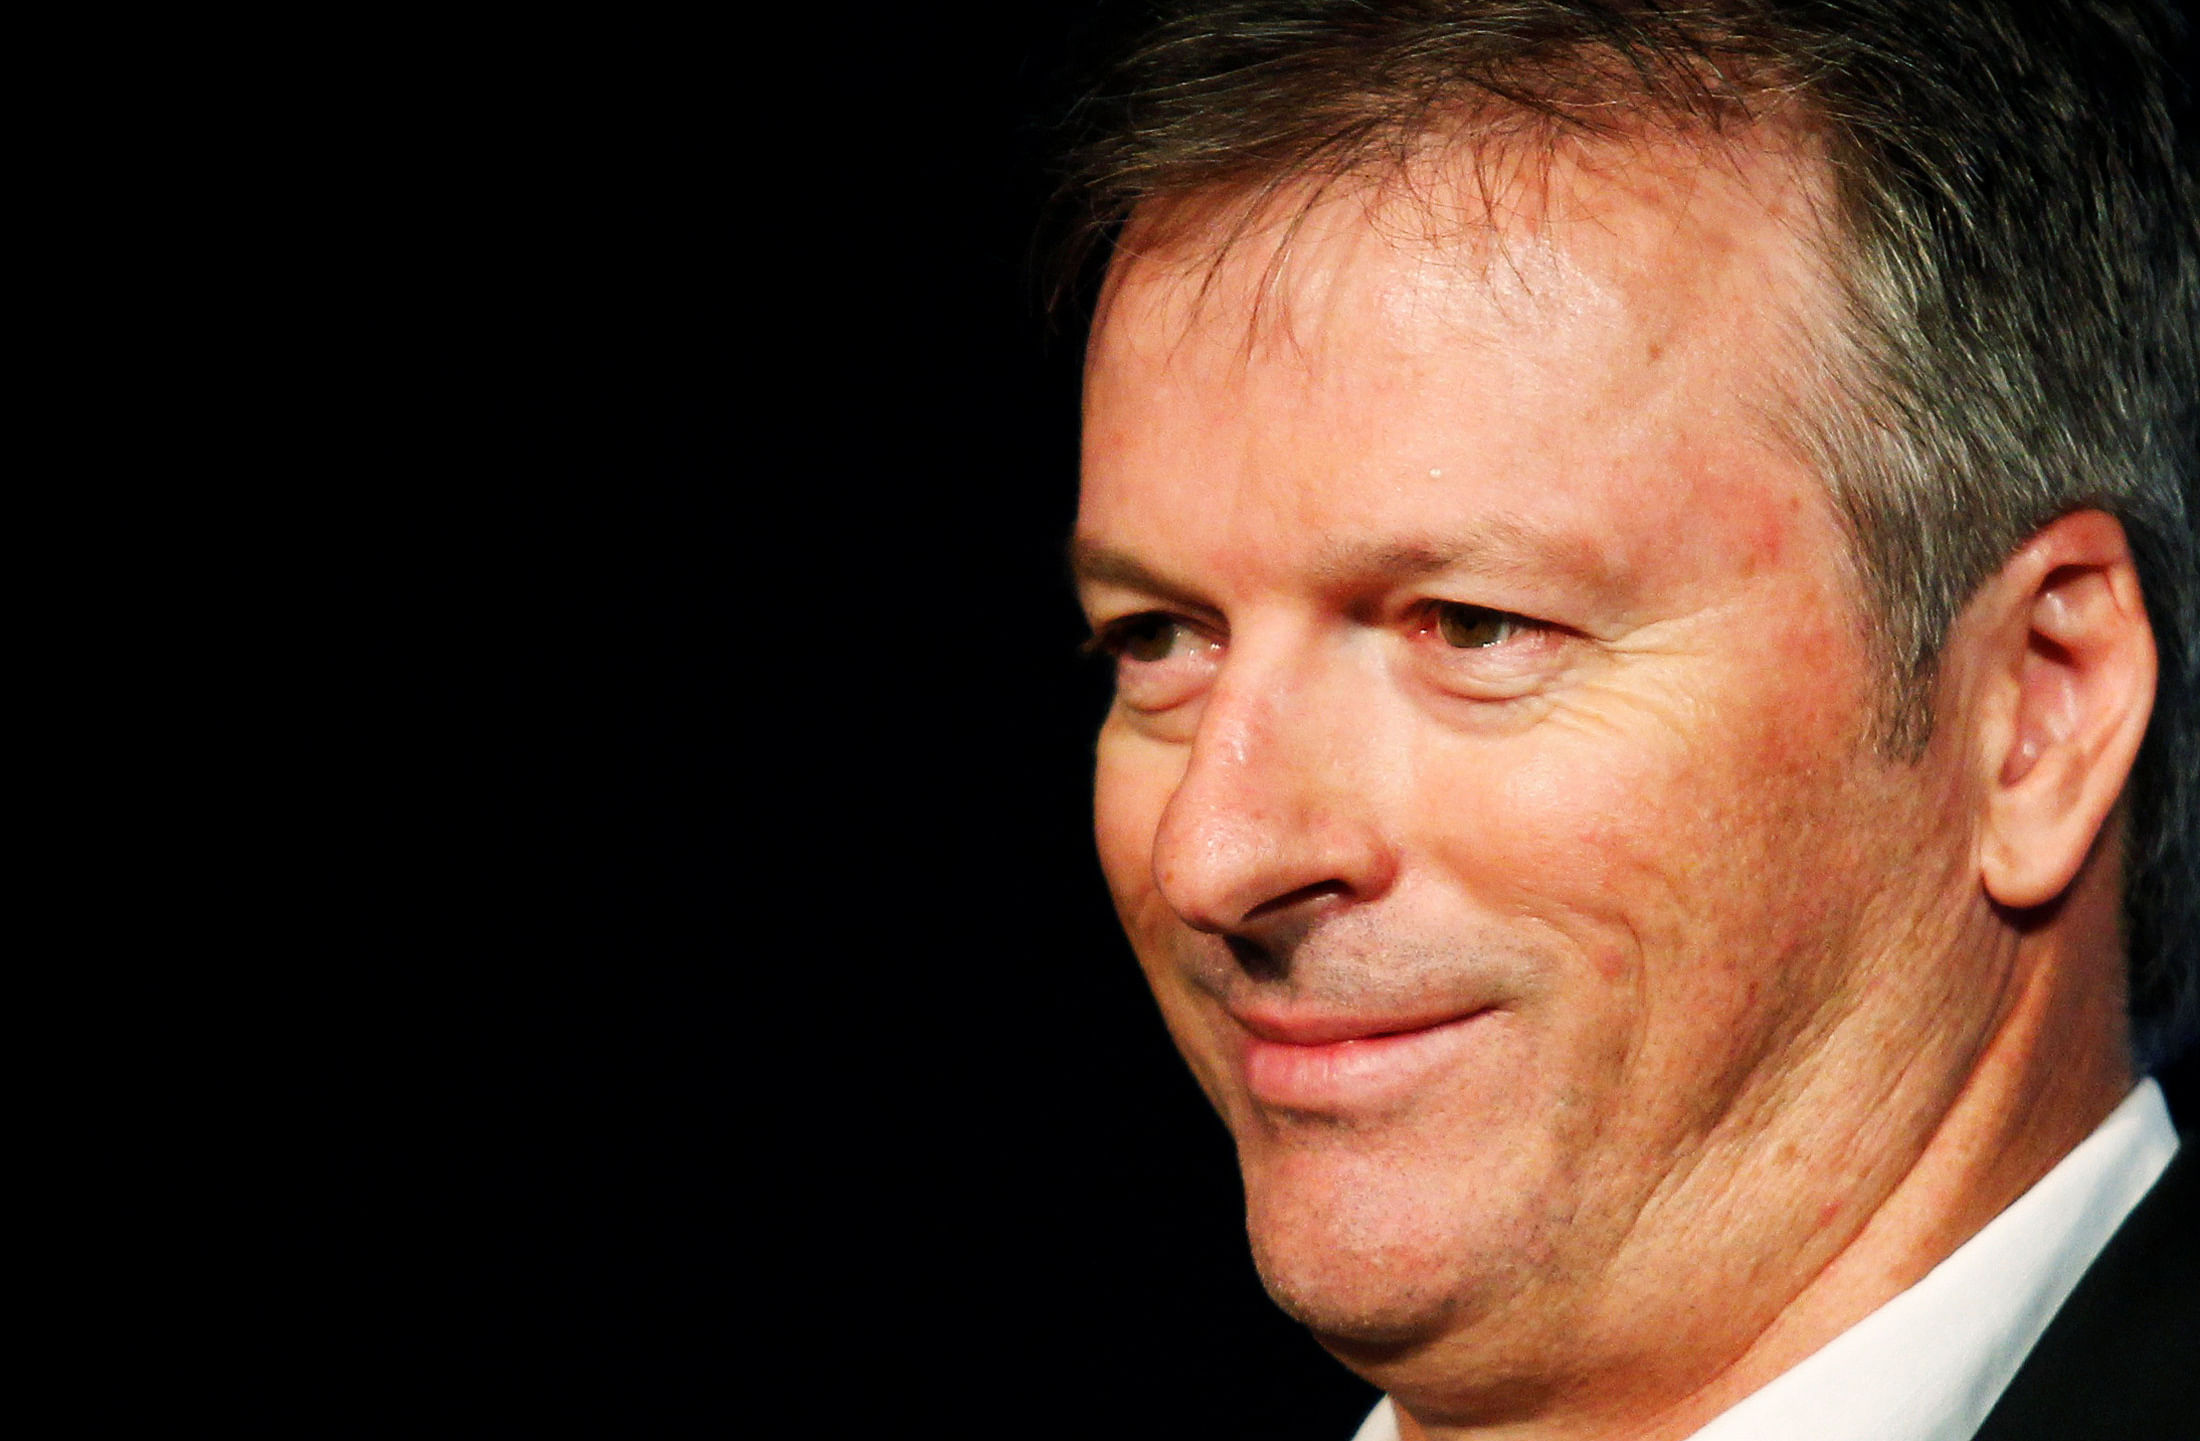 Former Australia captain Steve Waugh feels that David Warner has been playing in "second gear". (Reuters File Photo)